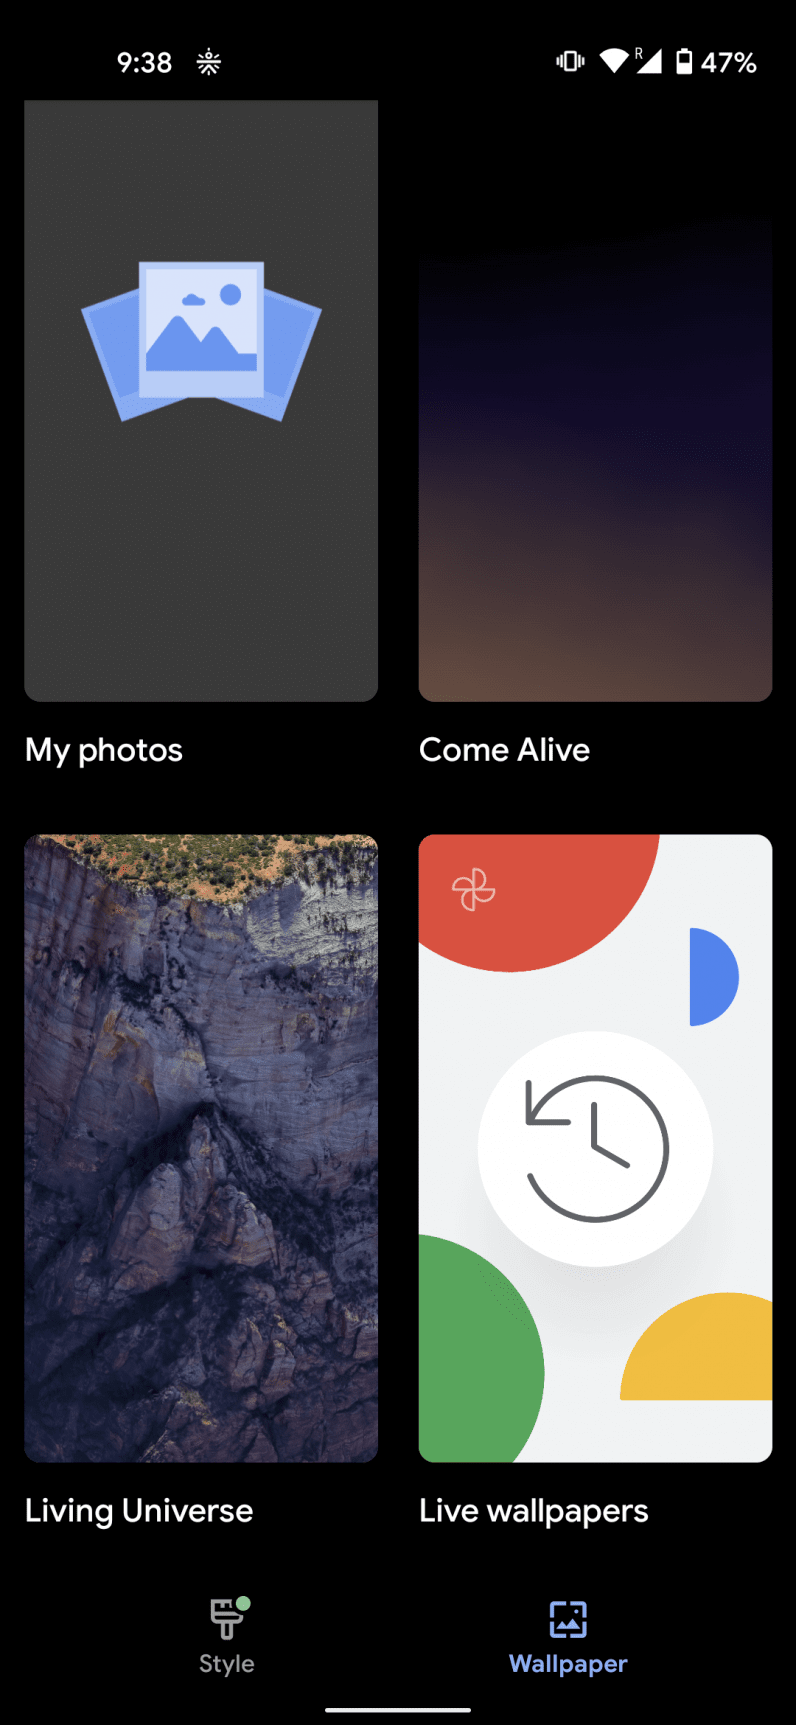 How Do I Make a Google Image My Wallpaper? how do i make a google image my wallpaper How do I make a Google image my wallpaper? Using a theme developed by Google, or setting a live wallpaper from your Google Photos album. If you haven't yet, this article will show you how. Follow these steps to make a Google photo your wallpaper. Once you have it set, you can even use it as a live wallpaper! You can see how it works in our video tutorial below. Setting a live wallpaper from your Google Photos album If you have a Google Photos album on your Android device, you can set a live wallpaper for it from the gallery app. This feature is available on Google Photos version 5.22 and above. You can also download the app from third-party websites if you don't have the latest version. To set a live wallpaper, first, you need to install the latest version of Google Photos. Then, open the album and tap on the "Set wallpaper" option. You can set images from your Google Photos album as live wallpaper for your Android device. Google Photos images make perfect live wallpapers and can also serve as picture carousels for smart devices. In version 5.22, you can use a 'Memories' photo as the live wallpaper. After that, the live wallpaper automatically updates to the latest version of the photo. Afterwards, you can use the live wallpaper as a personalised screensaver for your Android device. When you choose to set a live wallpaper from your Google Photos album, you'll have to tap on the gallery icon to access the album in the second slot. The app will take a few minutes to load the gallery, so you may want to wait until it loads. Once it does, you'll see a tiled collection of all of your photos. These are arranged by date. You can select any image from your Google Photos album and set it as your live wallpaper. Using a Google-developed theme You can use a Google-developed theme to make whichever image you like your desktop background. Google says everything it uploads to the Chrome Web Store is scanned. That doesn't mean all of these themes are malicious, but you'll want to stay with themes developed by Google. First, you'll need a Google image that's at least 30 x 30 pixels. There are many themes available for making your Google image your wallpaper. You can browse through them by category. To view themes that are created by Google, expand the corresponding category. Once you're on this page, click the theme you want to use. Once you've selected a theme, check out the theme's preview and support area. If you're unsure about the theme, check out the related tab. Changing your background from the Google website is not possible unless you use the Chrome browser. To do this, go to the Background section and click on one of the available themes. You can also add a custom image from your PC. Simply select the image from your computer and tap the Done button. Then you'll see the change live on your screen. While this option may be limited, it's still the best way to change your background and customize the look of your desktop. Using an image from your Google Photos album as a wallpaper Using an image from your Google Photos album can be a great way to display your favorite pictures on your Android device. While the service does not have a direct setting for making an image your wallpaper, it is possible to download any image you want to use as a background. To do this, first open the Photos app and swipe up on any photo to see its details. From there, tap Download to save the photo to your Photos app. You can then position the image on your screen by pinching it with two fingers and dragging it. Using an image from your Google Photos album is a new feature available for Android devices. Users can use one of their saved photos to set a rotating wallpaper on their device. The app automatically includes the Memories live wallpaper, which pulls photos from your Google Photos Memory section. Users can preview the live wallpaper before confirming it. To use an image from your Google Photos album as a wallpaper, you can download the software from Google Play. Using an image from your Google Photos album is now possible on Chrome OS. The feature is currently being tested and is not yet available for stable versions of the Chrome OS operating system. When the integration goes live, it will appear in the second slot. In the meantime, you can use the feature for your Android device by enabling the new flag in chrome://flags. To make an image from your Google Photos album your wallpaper, go to the Settings app and click on the Albums tab. You will now see a tiled gallery of your entire Google Photos album. From there, you can choose the one you want.